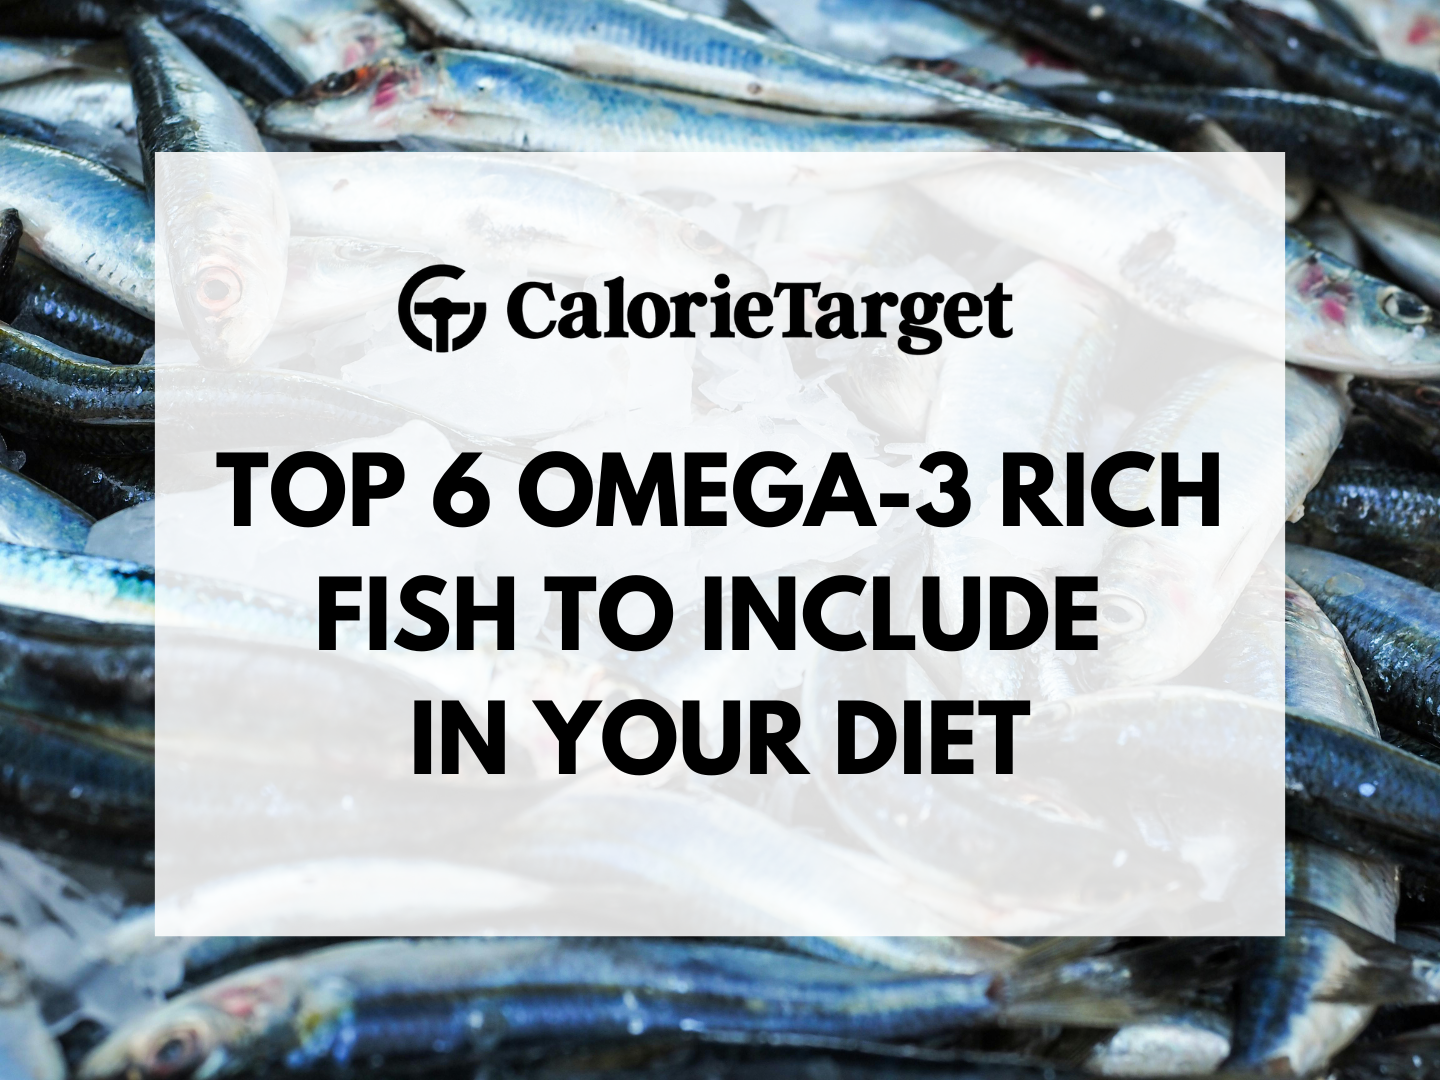 Top 6 Omega 3 rich fish to include in your diet